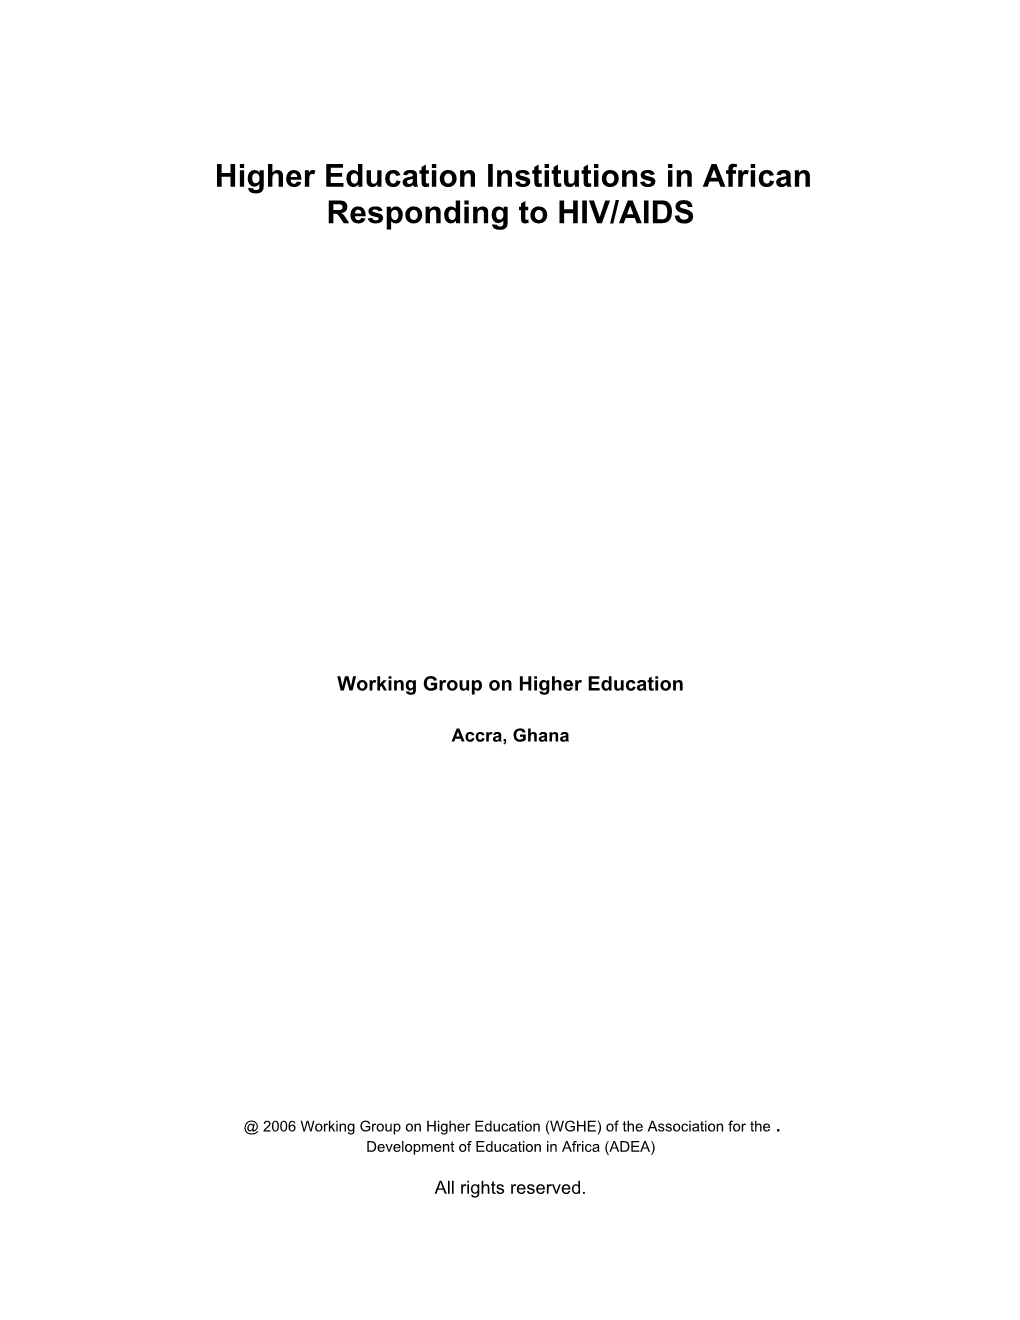 Higher Education Institutions in African Responding to HIV/AIDS